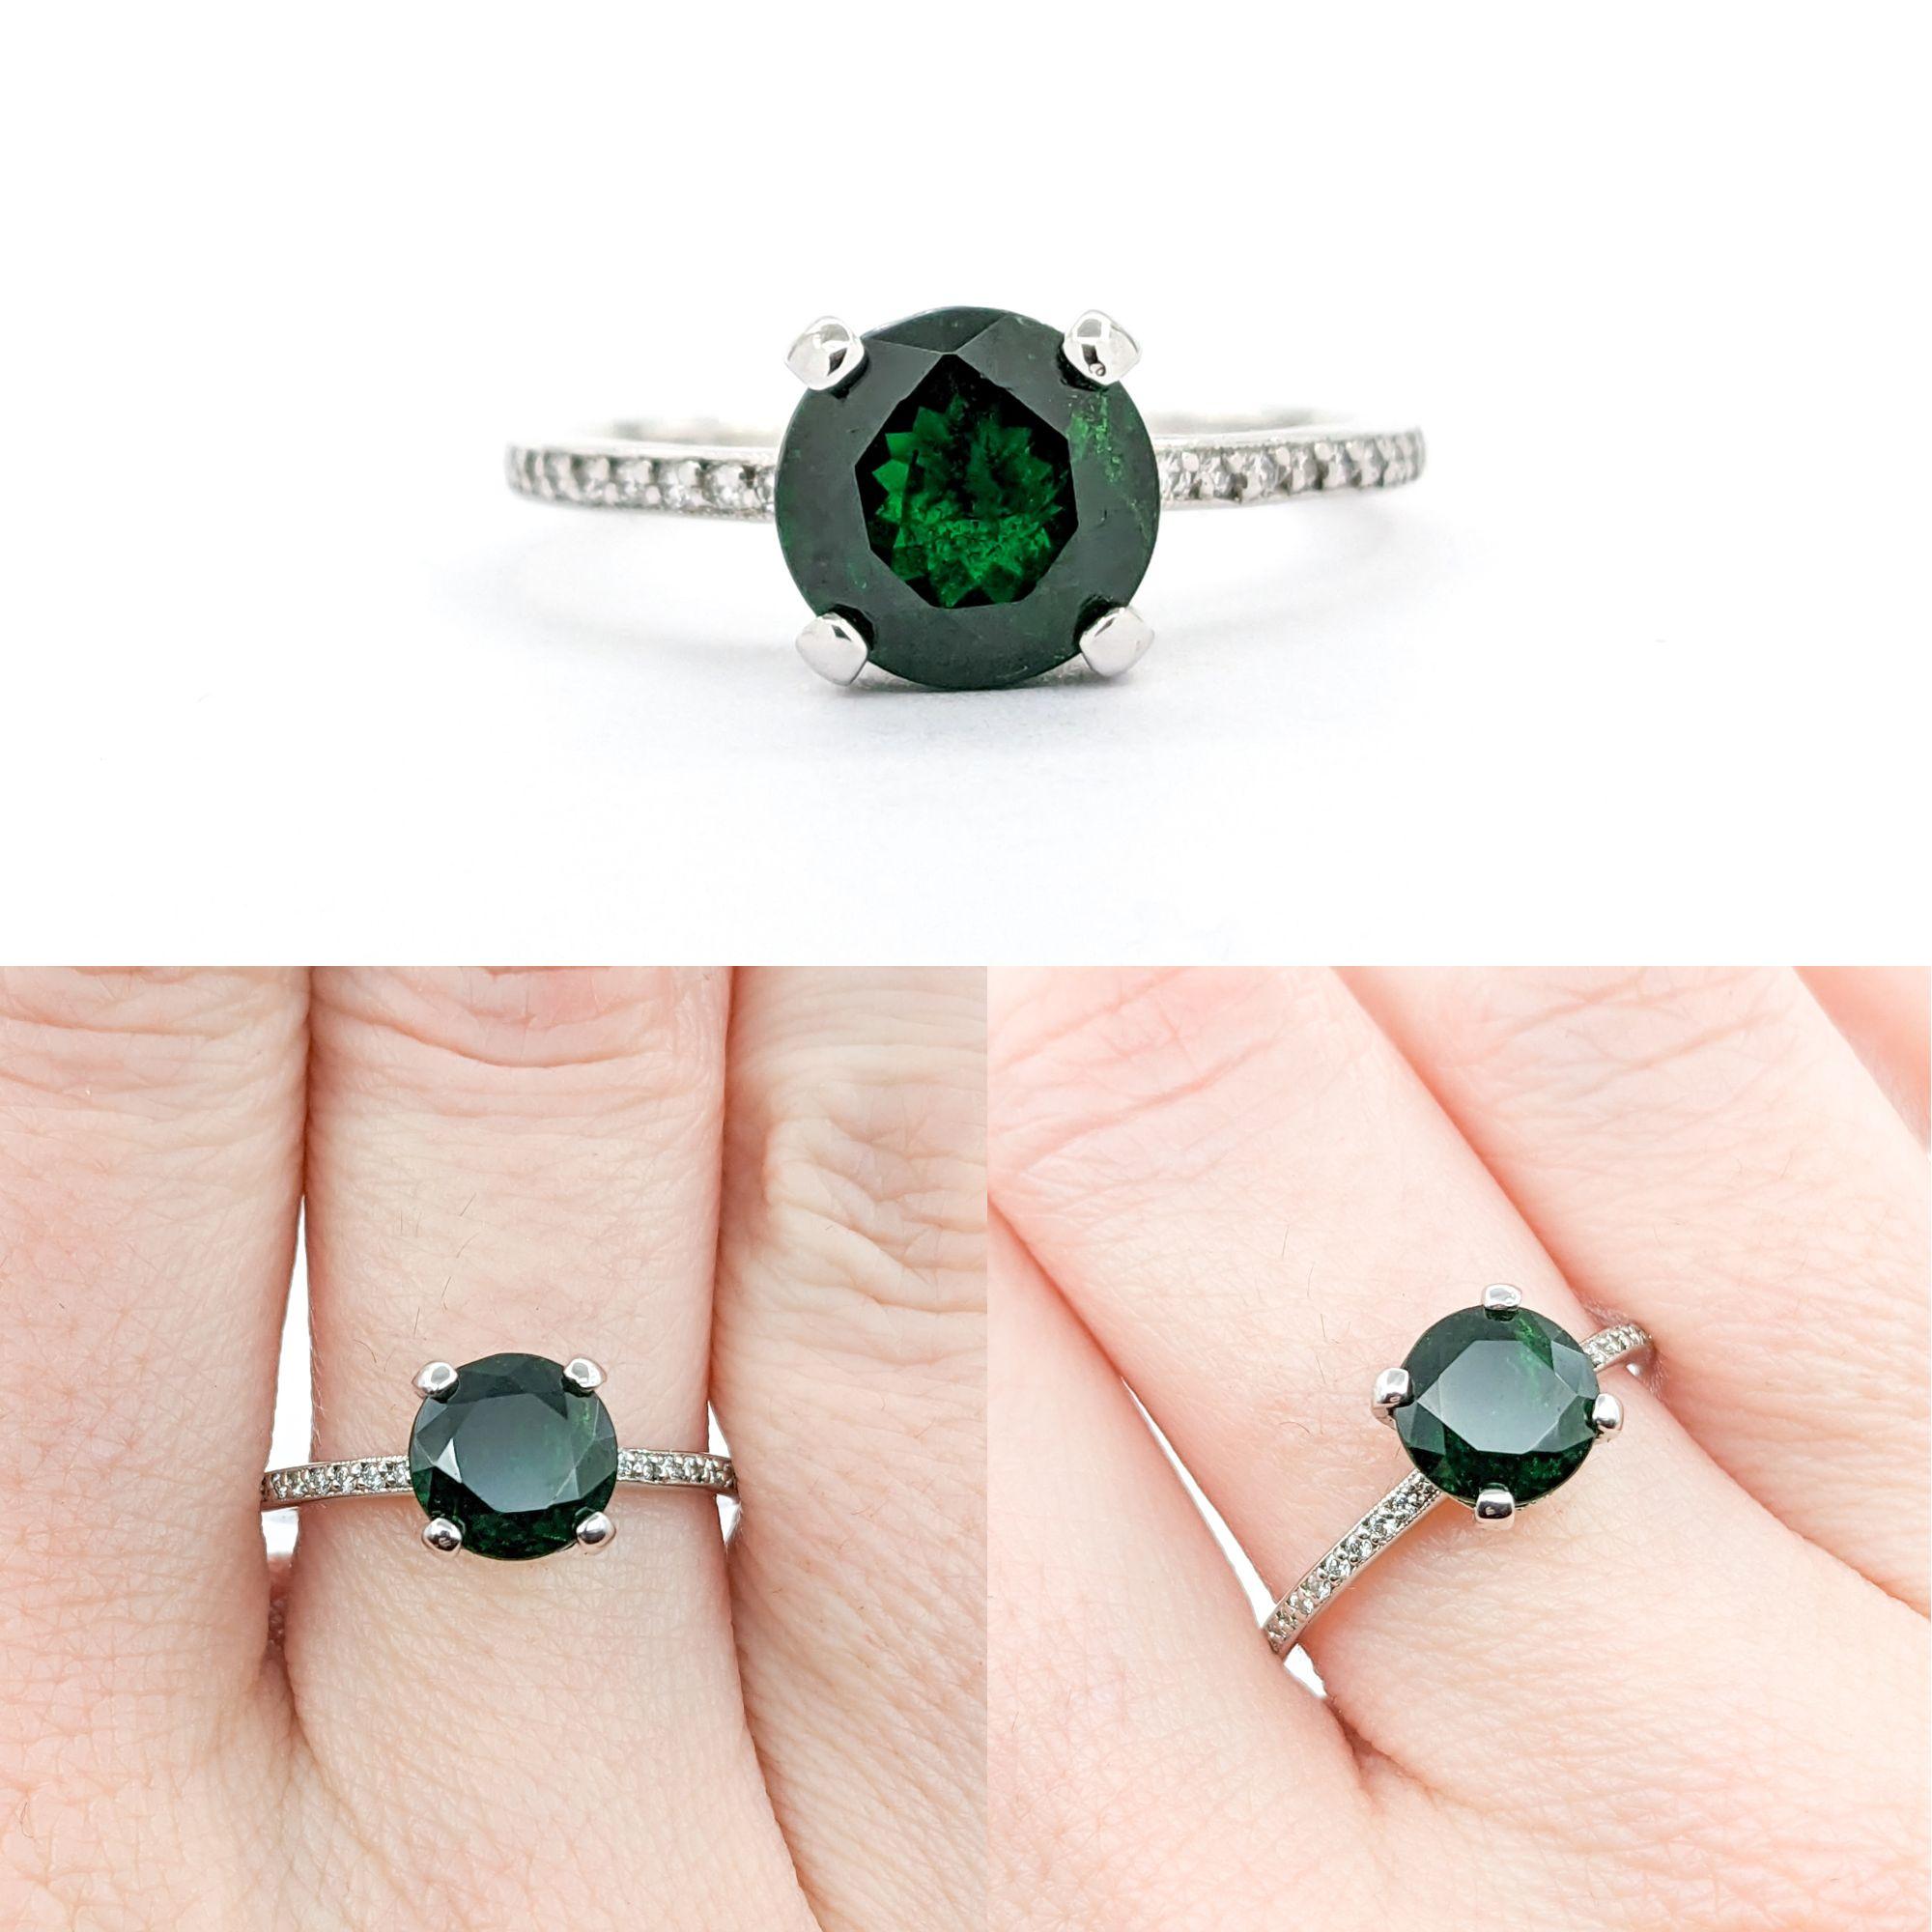 2.04 Tsavorite Garnet and Diamond Ring in 18k White Gold

This stunning ring features a 2.04ct Tsavorite Garnet centerpiece complemented by 0.25ctw of round Diamonds. These diamonds are of SI clarity and exhibit a near colorless white hue. The total